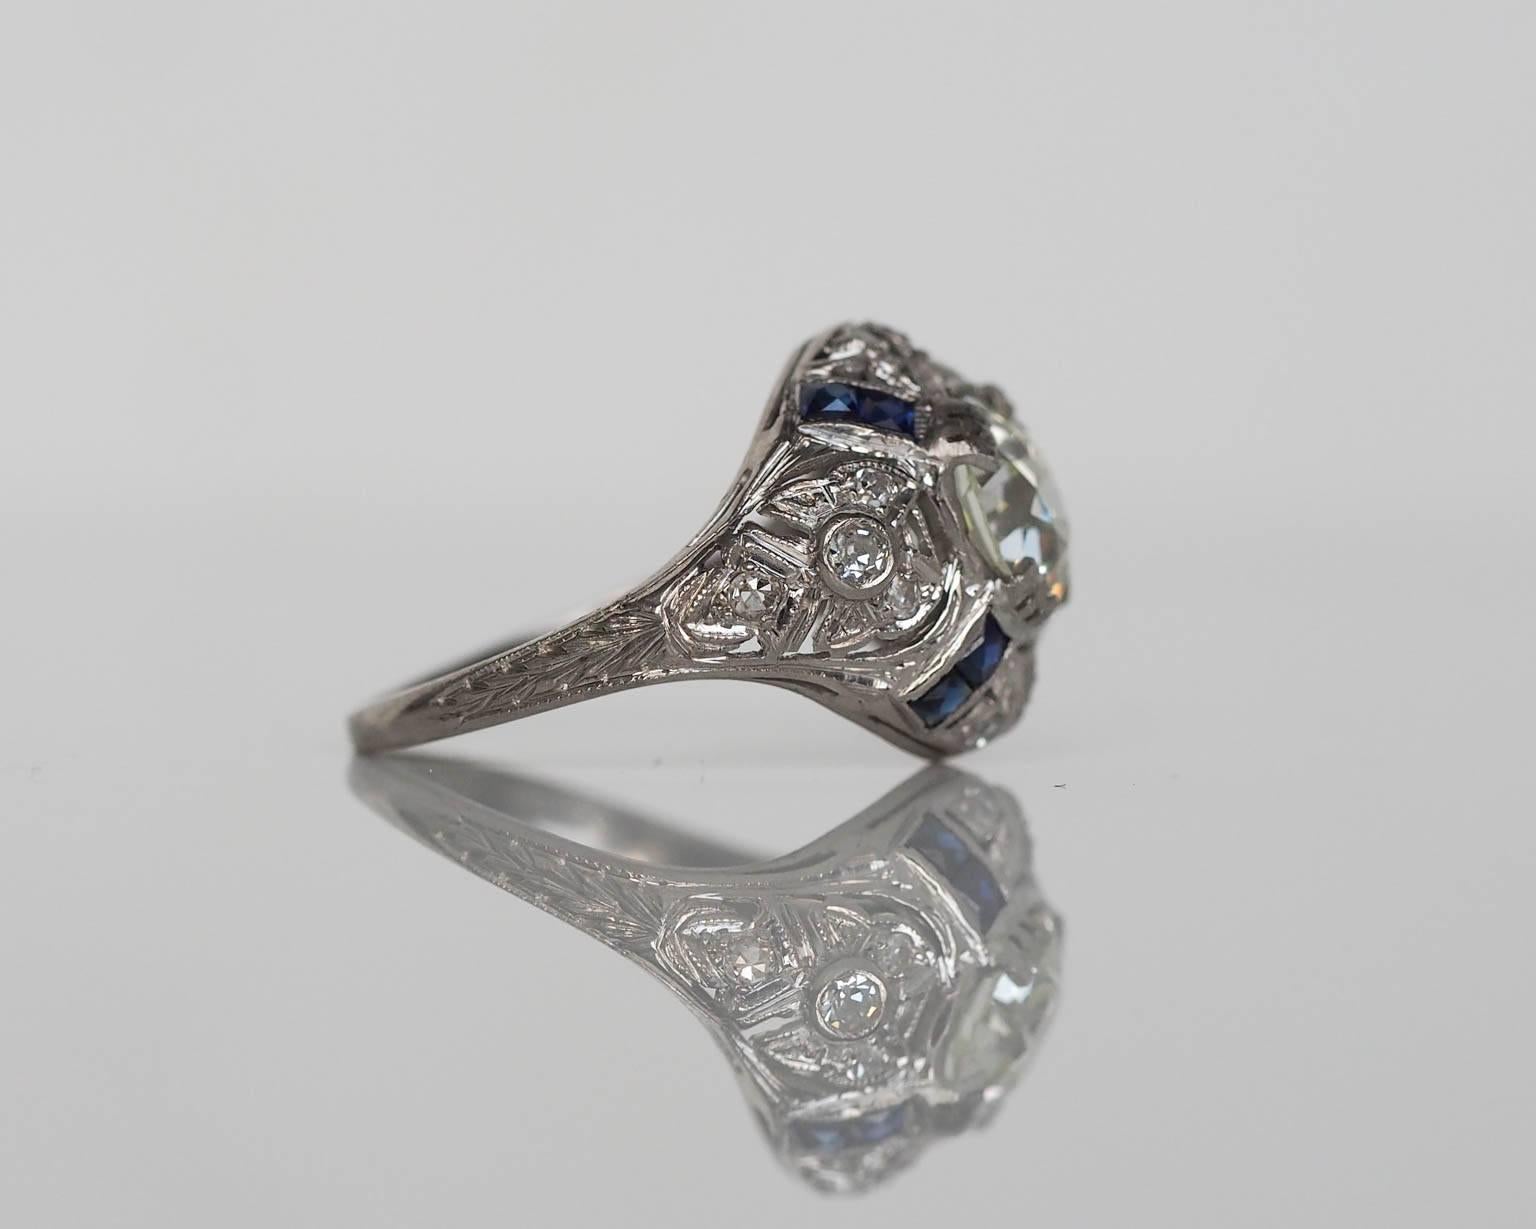 Here is a spectacular art deco engagement ring, with ultra high quality components. The piece is hand crafted in platinum with very intricate and precise set diamonds around the head. The center diamond is a large 1.67ct GIA certified Old European